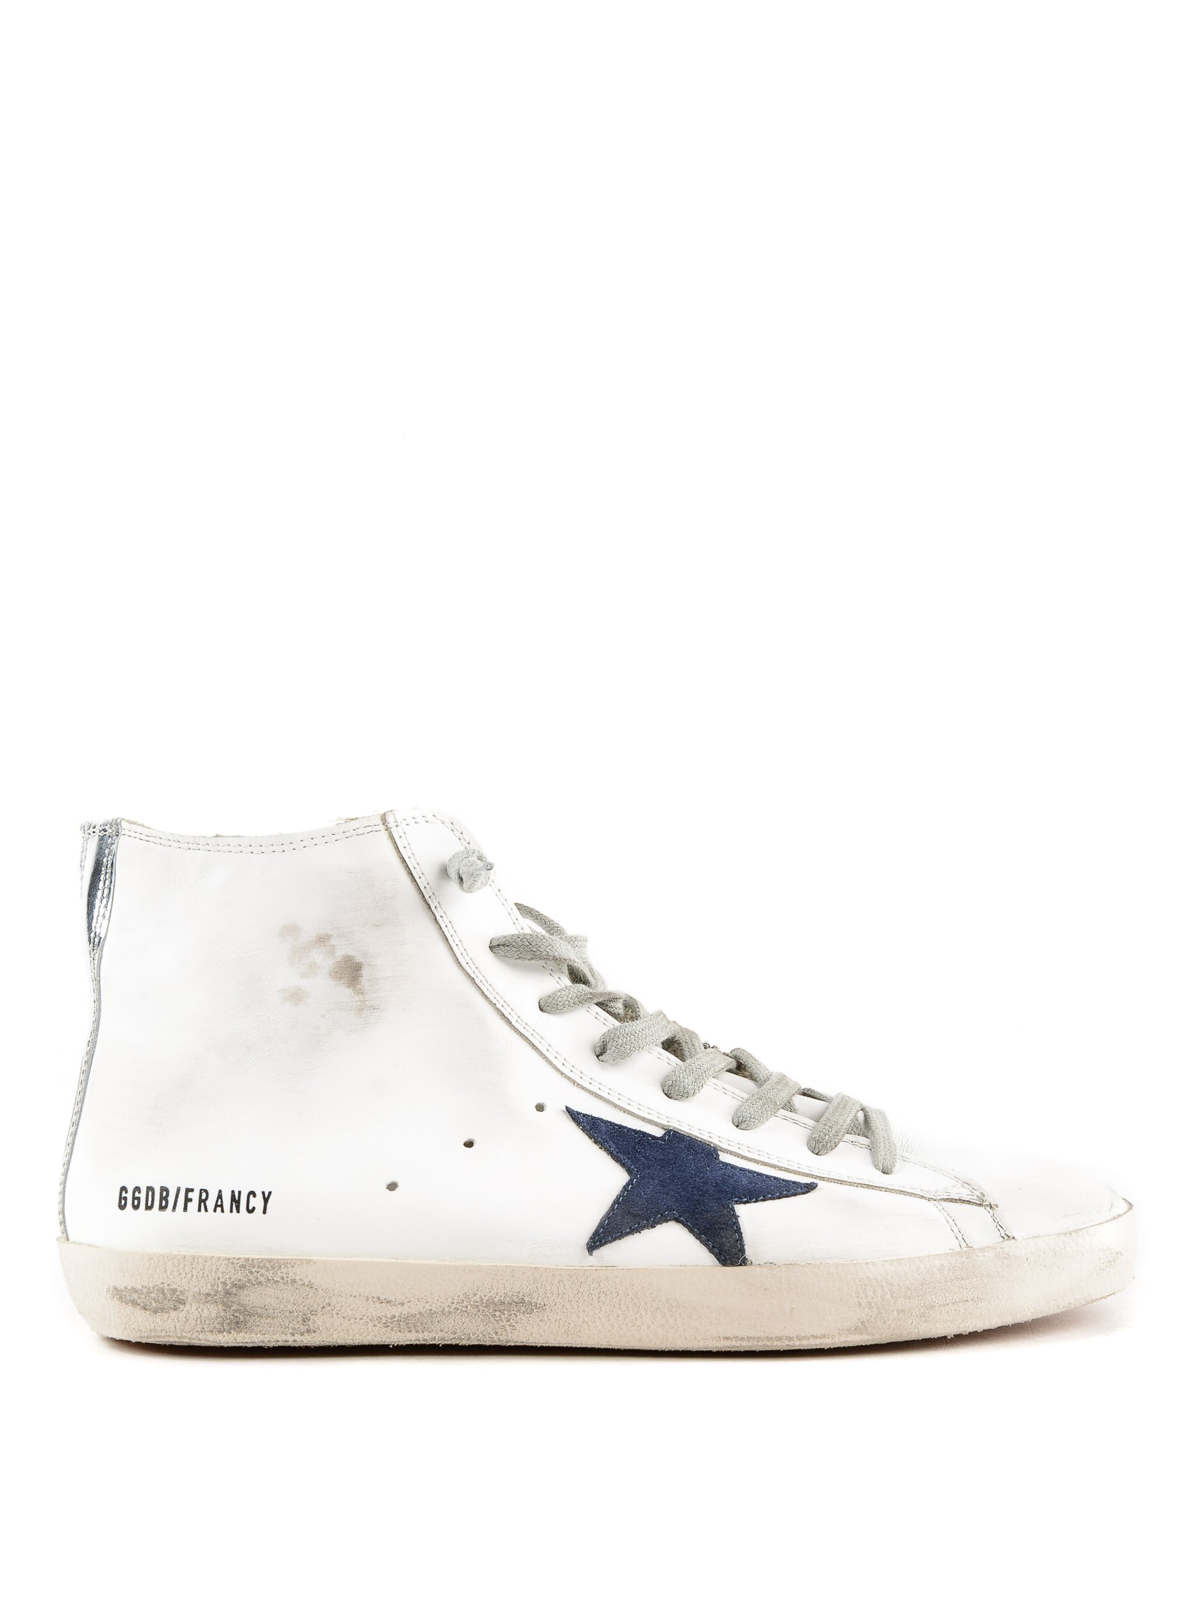 Trainers Golden Goose - Francy white and blue high top sneakers